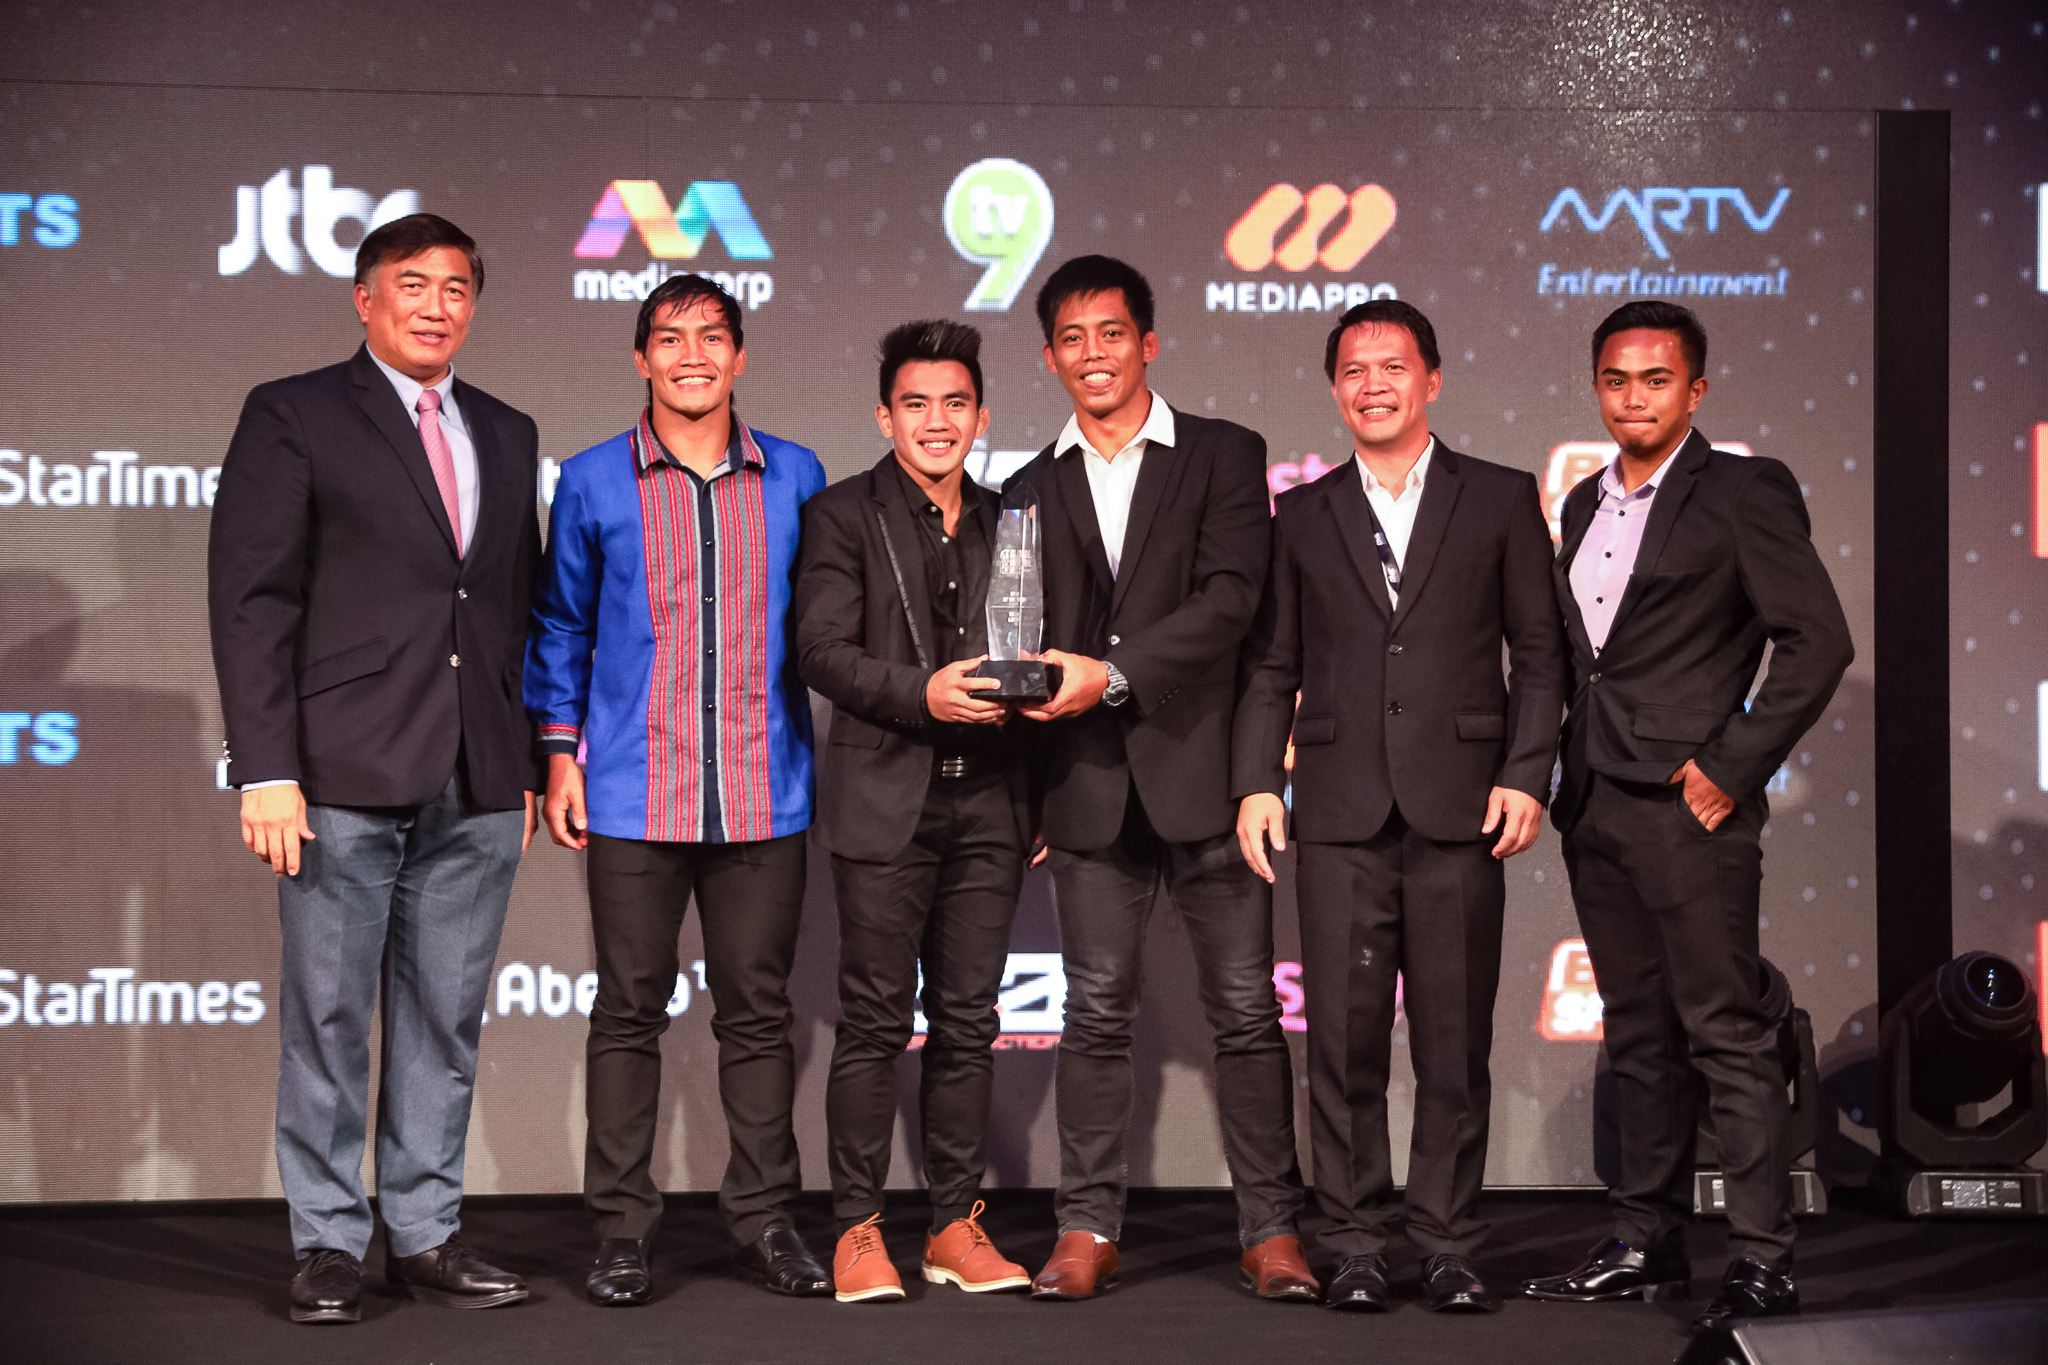 Team Lakay bags multiple recognition at 2018 Global Martial Arts Awards